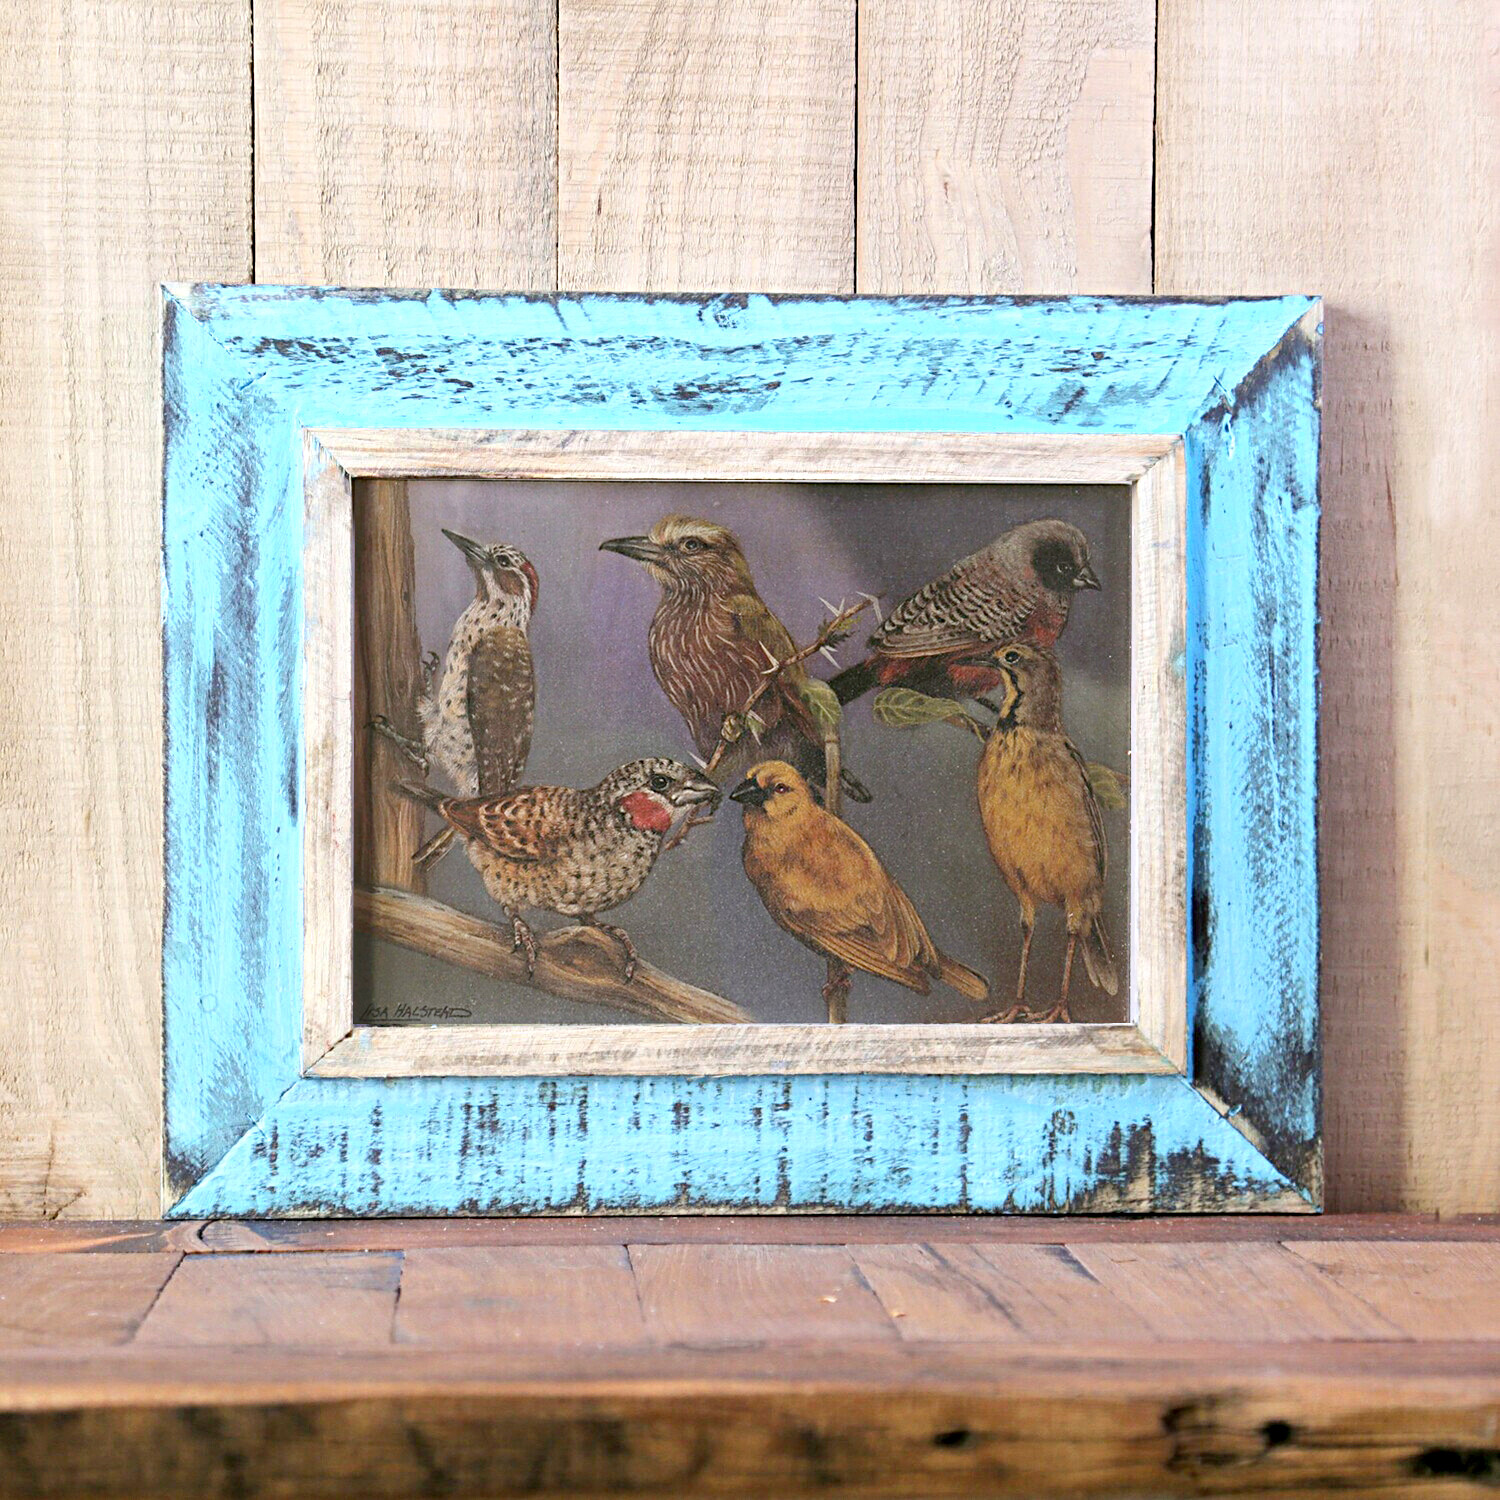 A4 Rustic wooden frame - 21 cm x 30 cm (8.3 x 11.8 inches)